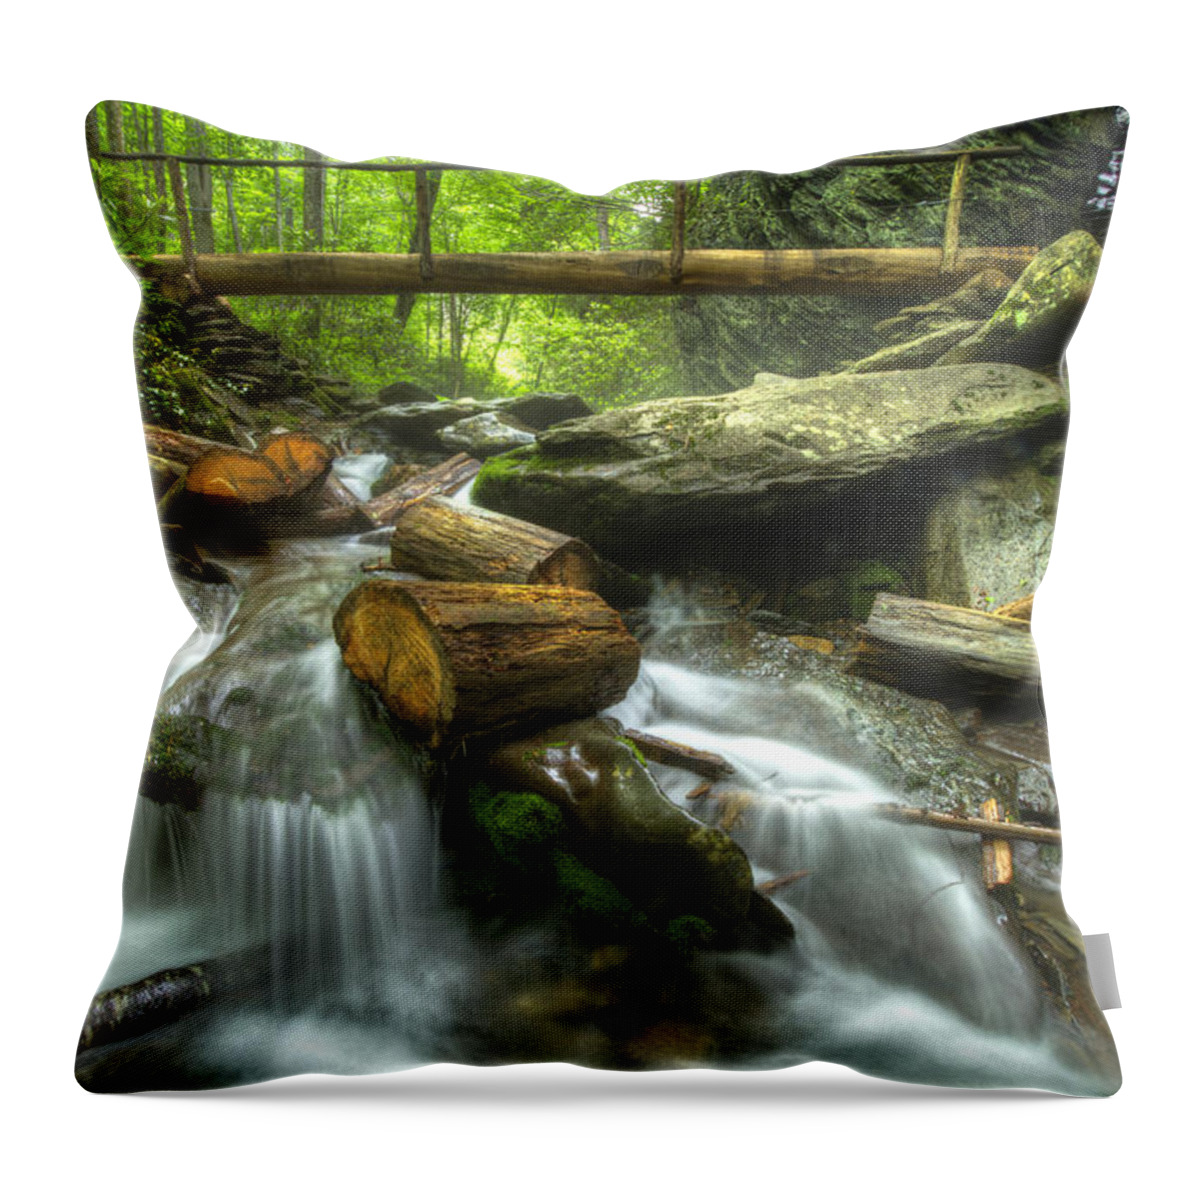 Appalachia Throw Pillow featuring the photograph The Bridge at Alum Cave by Debra and Dave Vanderlaan